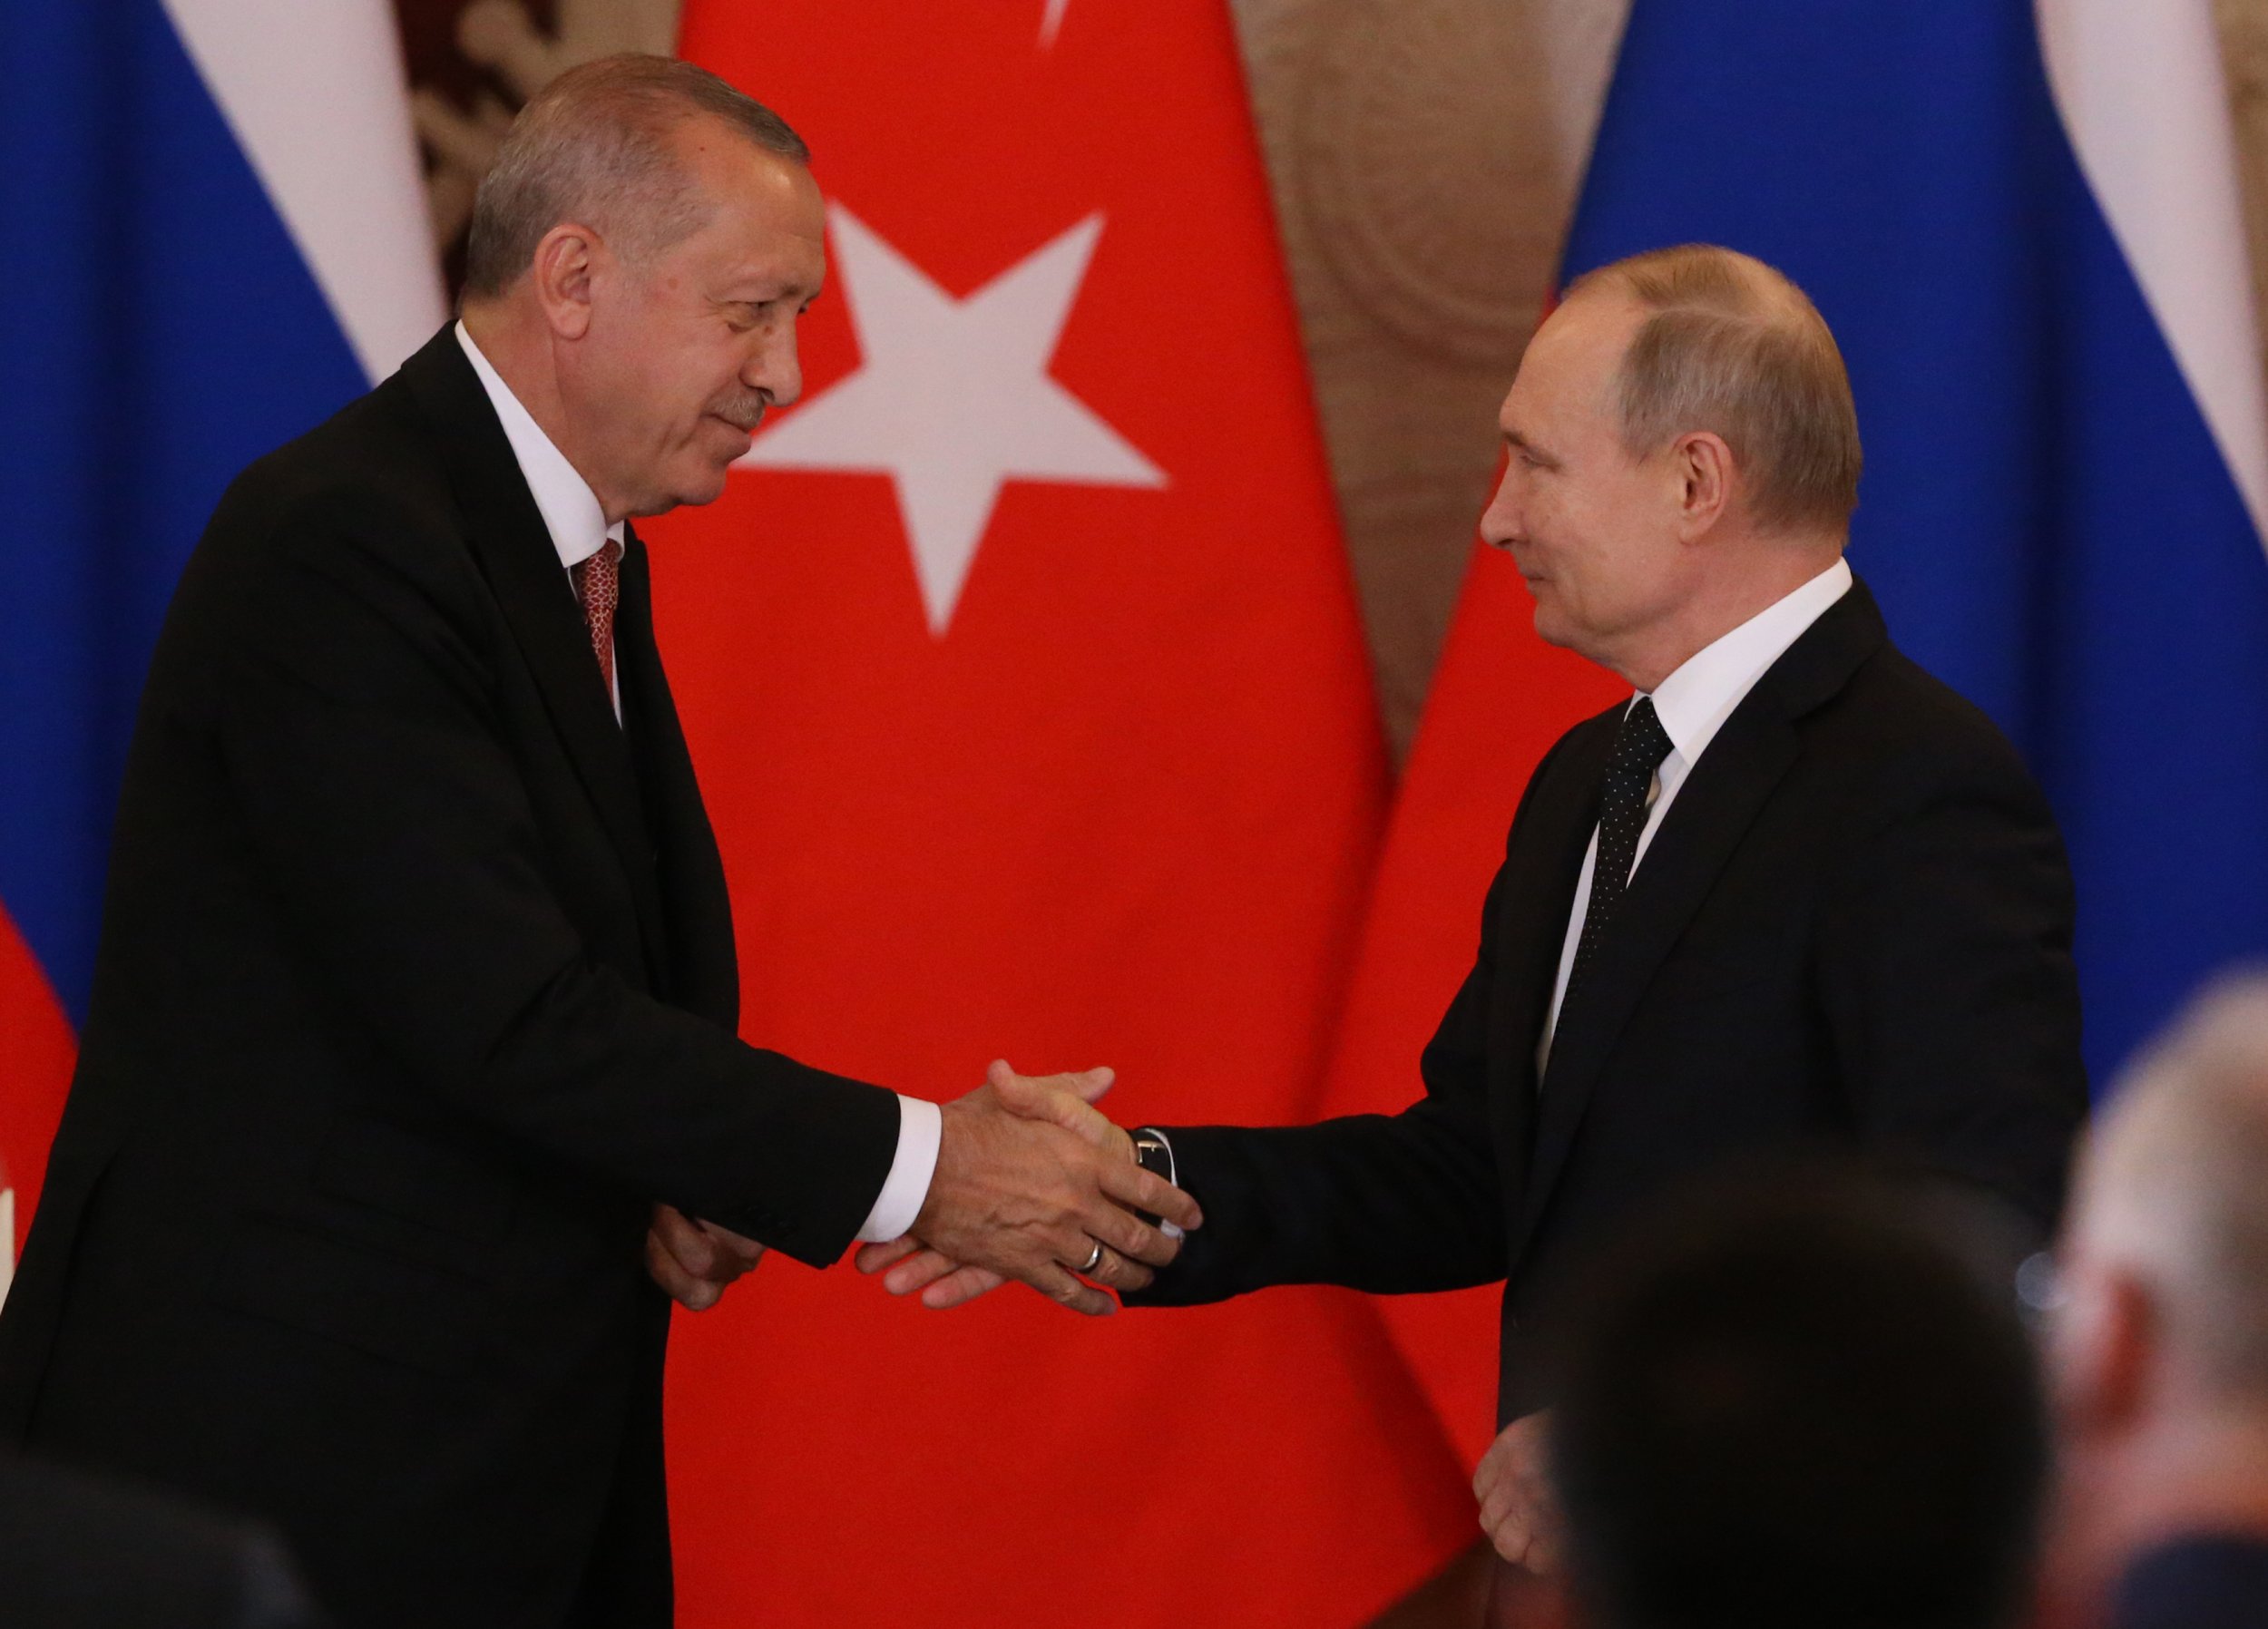 Turkey Will Complete Purchase of Russian Missile System Despite Risk of